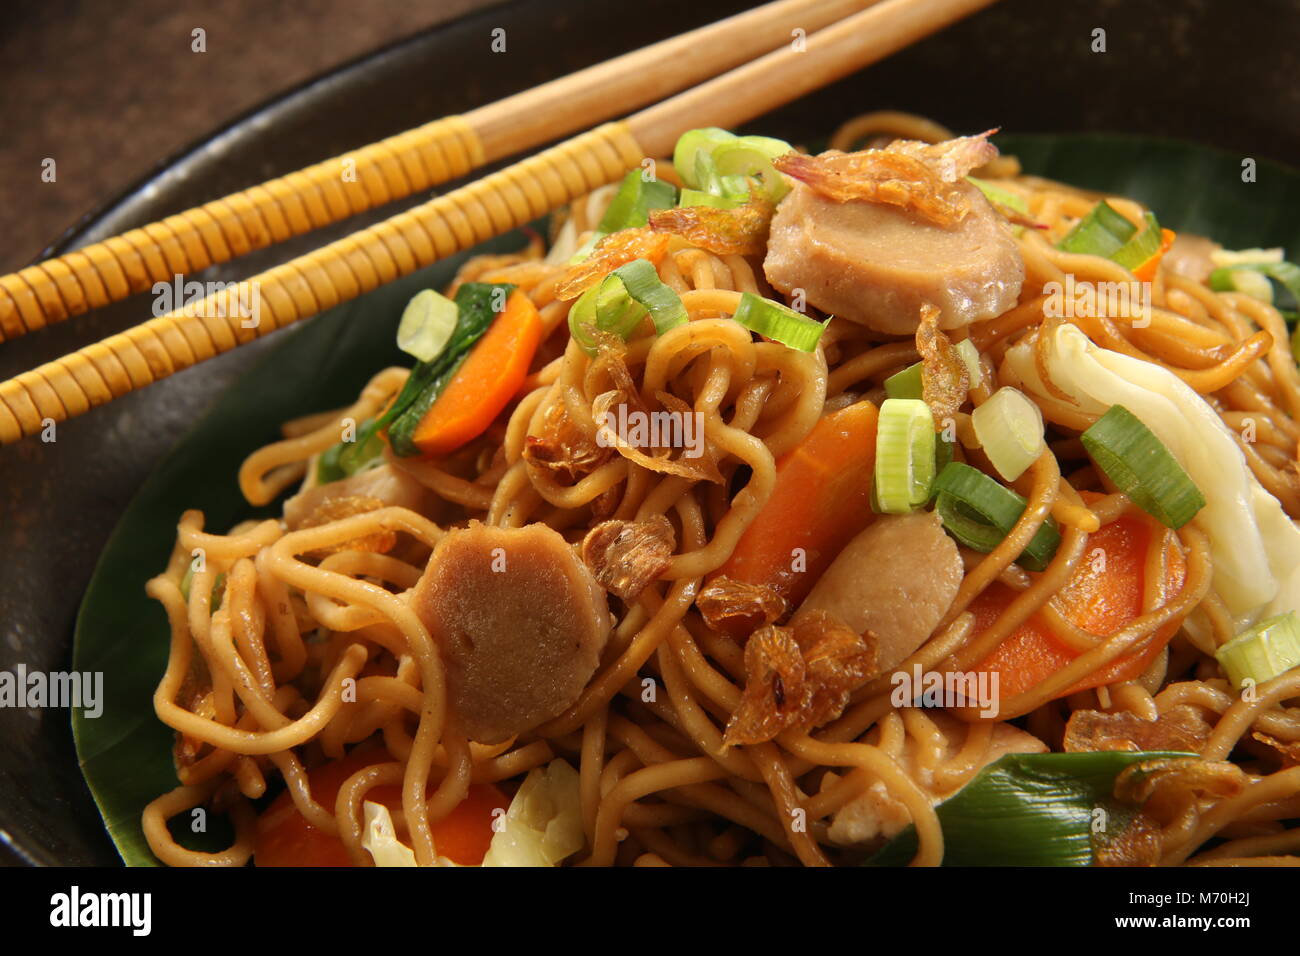 Mee Goreng, Fried Noodles with Meatballs, Vegetables and Soy Sauce Stock Photo